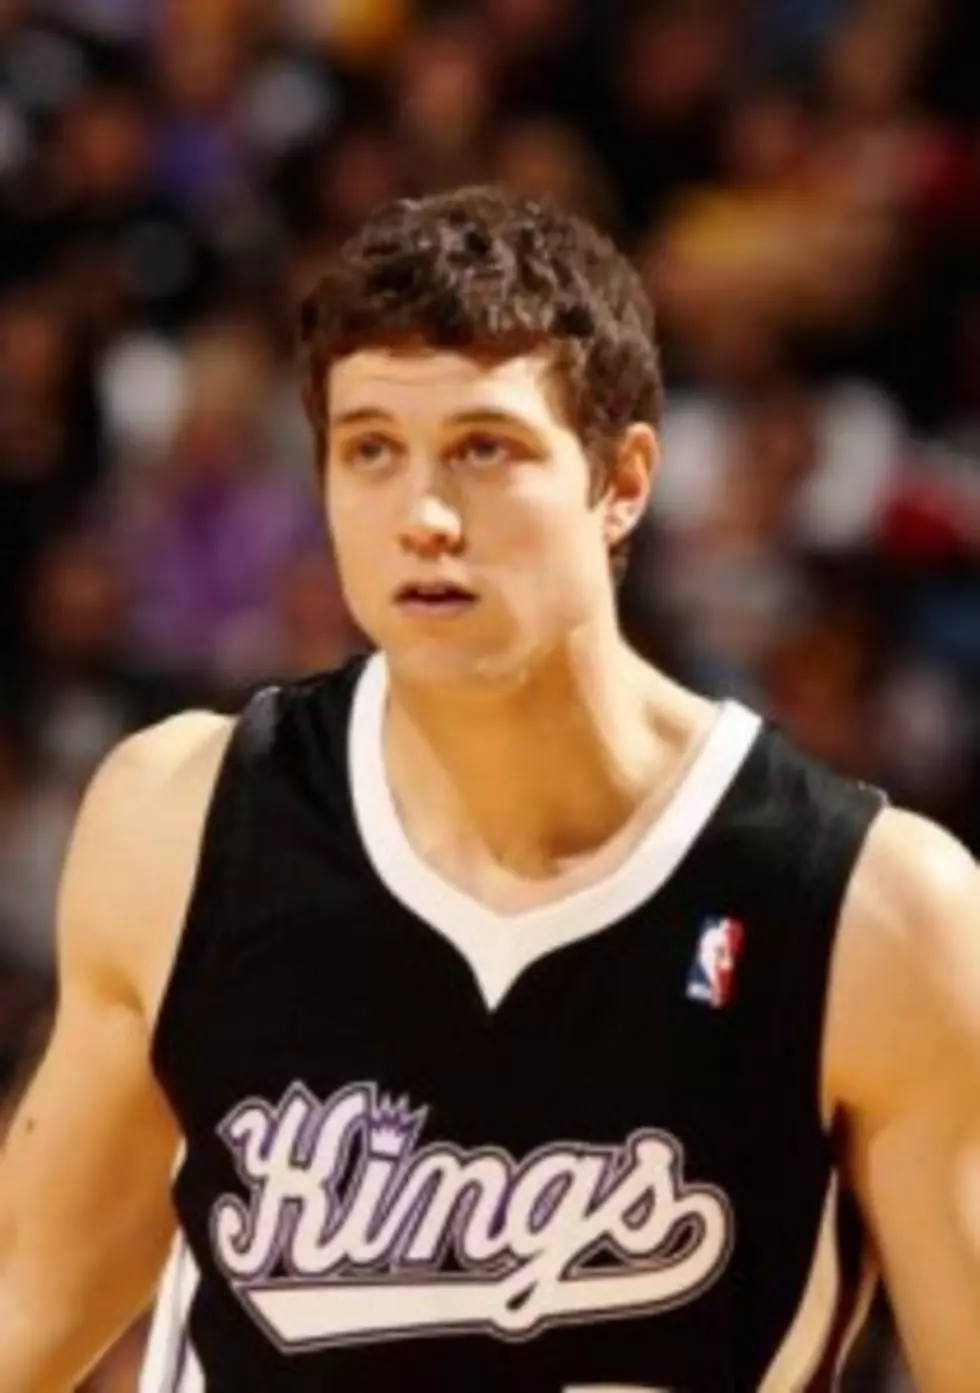 Jimmer Fredette Signing New Book At Colonie Center Mall